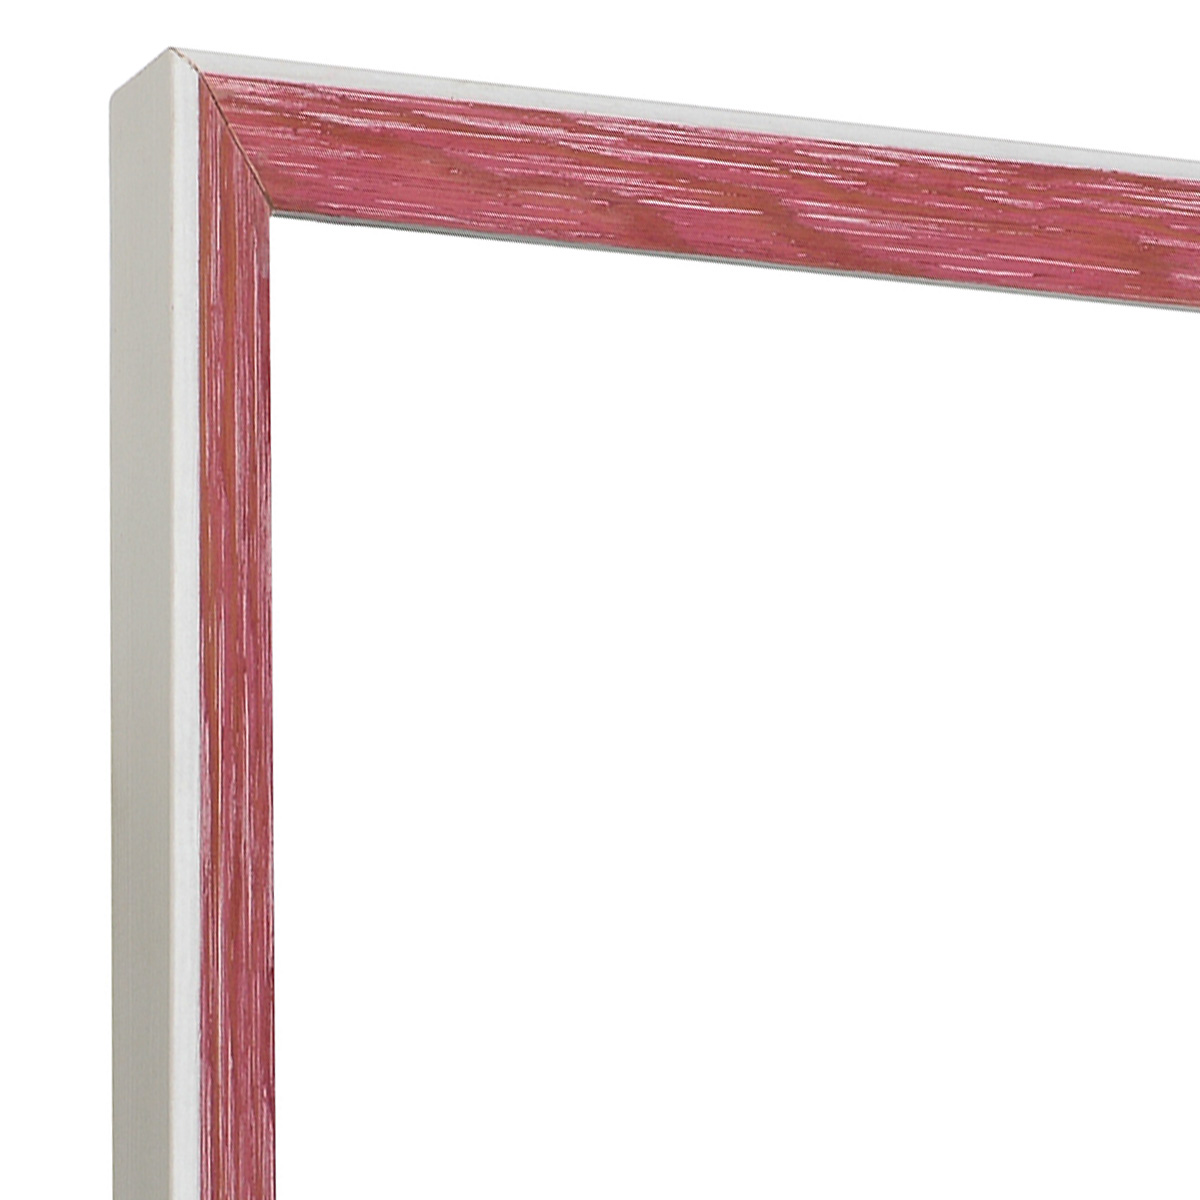 Moulding finger-jointed pine, width 15mm height 20mm, pink colour - Corner